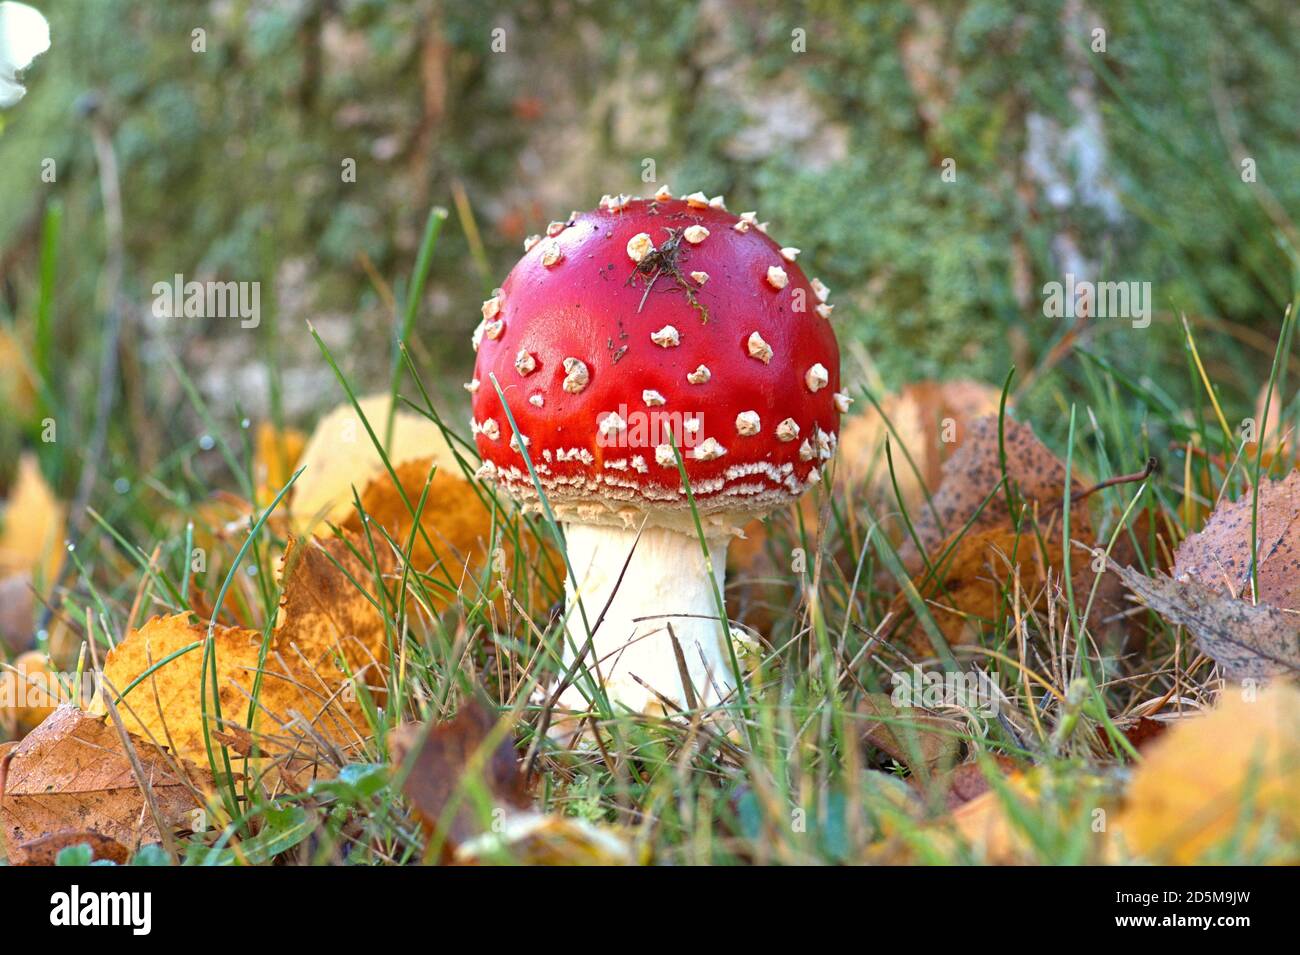 October 13, 2020, Schleswig, a small red fly agaric (Amanita muscaria), a poisonous mushroom, from the amanita family on the trunk of a birch. Class: Agaricomycetes, subclass: Agaricomycetidae, order: Mushroom-like (Agaricales), family: Amanitaceae, genus: Amanita, species: Toadstool | usage worldwide Stock Photo